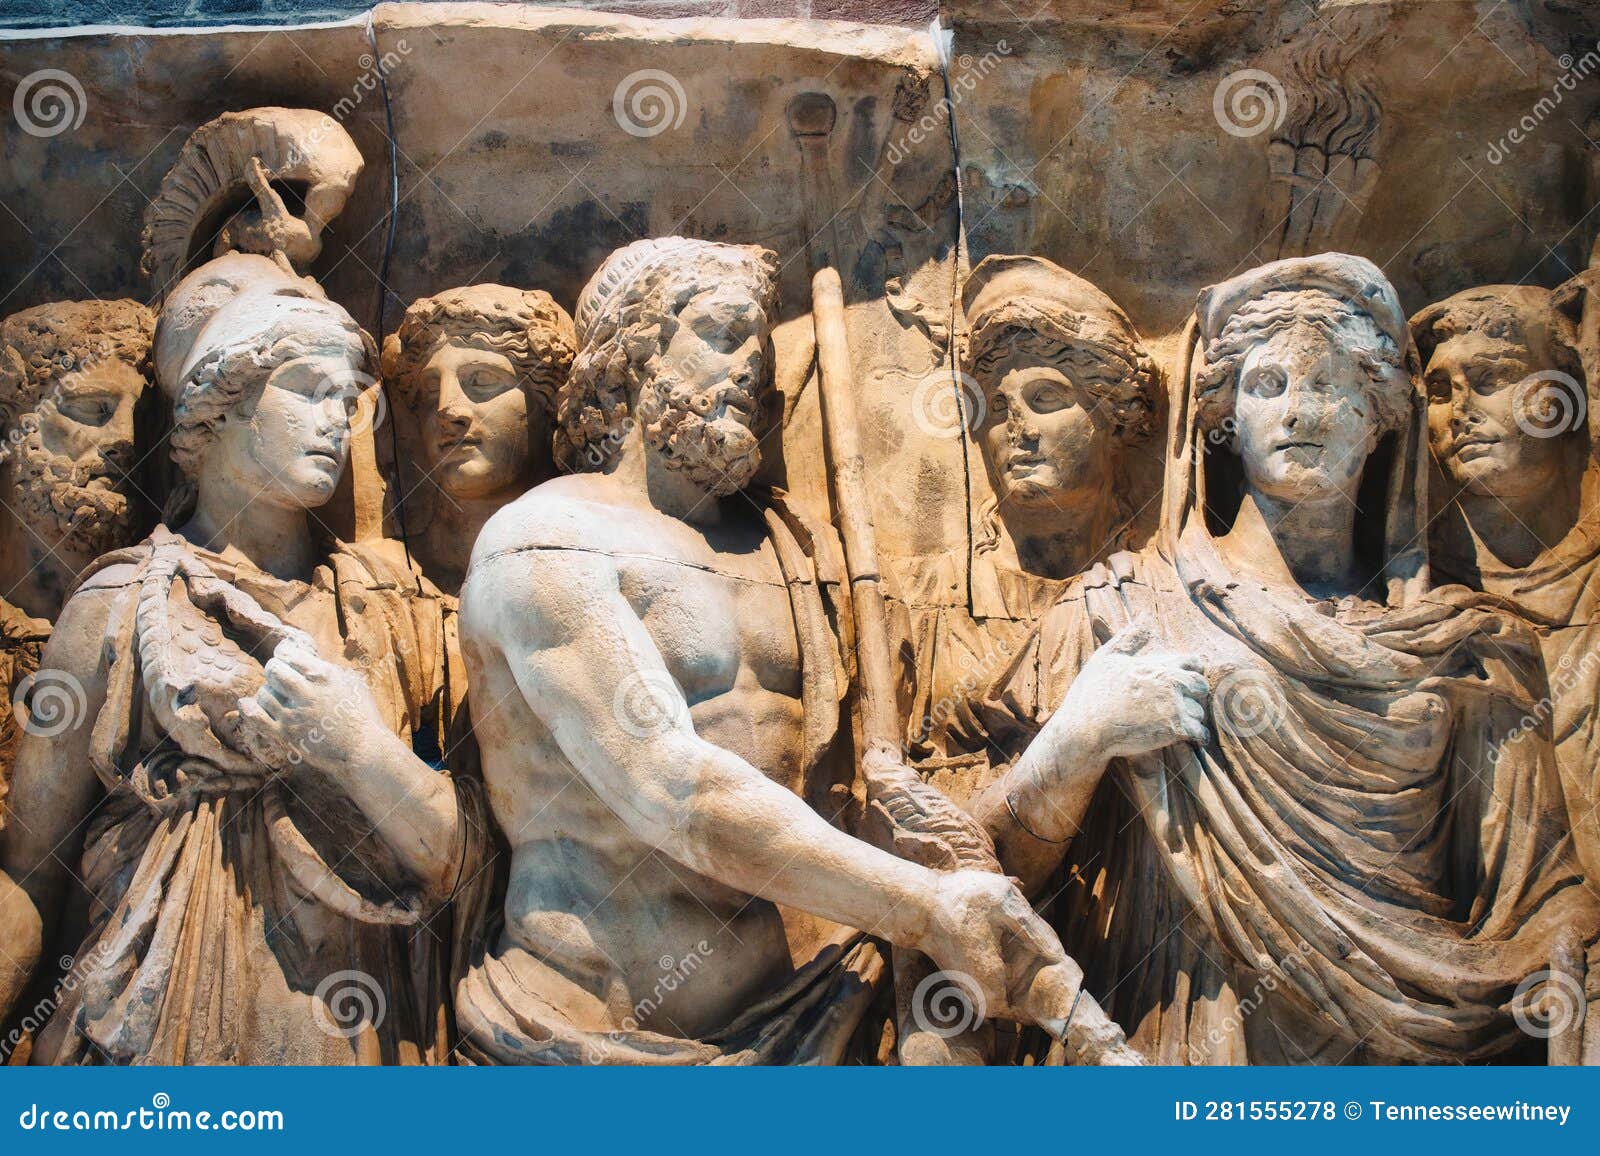 Relief Sculptures from the Arch of Trajan, an Ancient Roman Triumphal ...